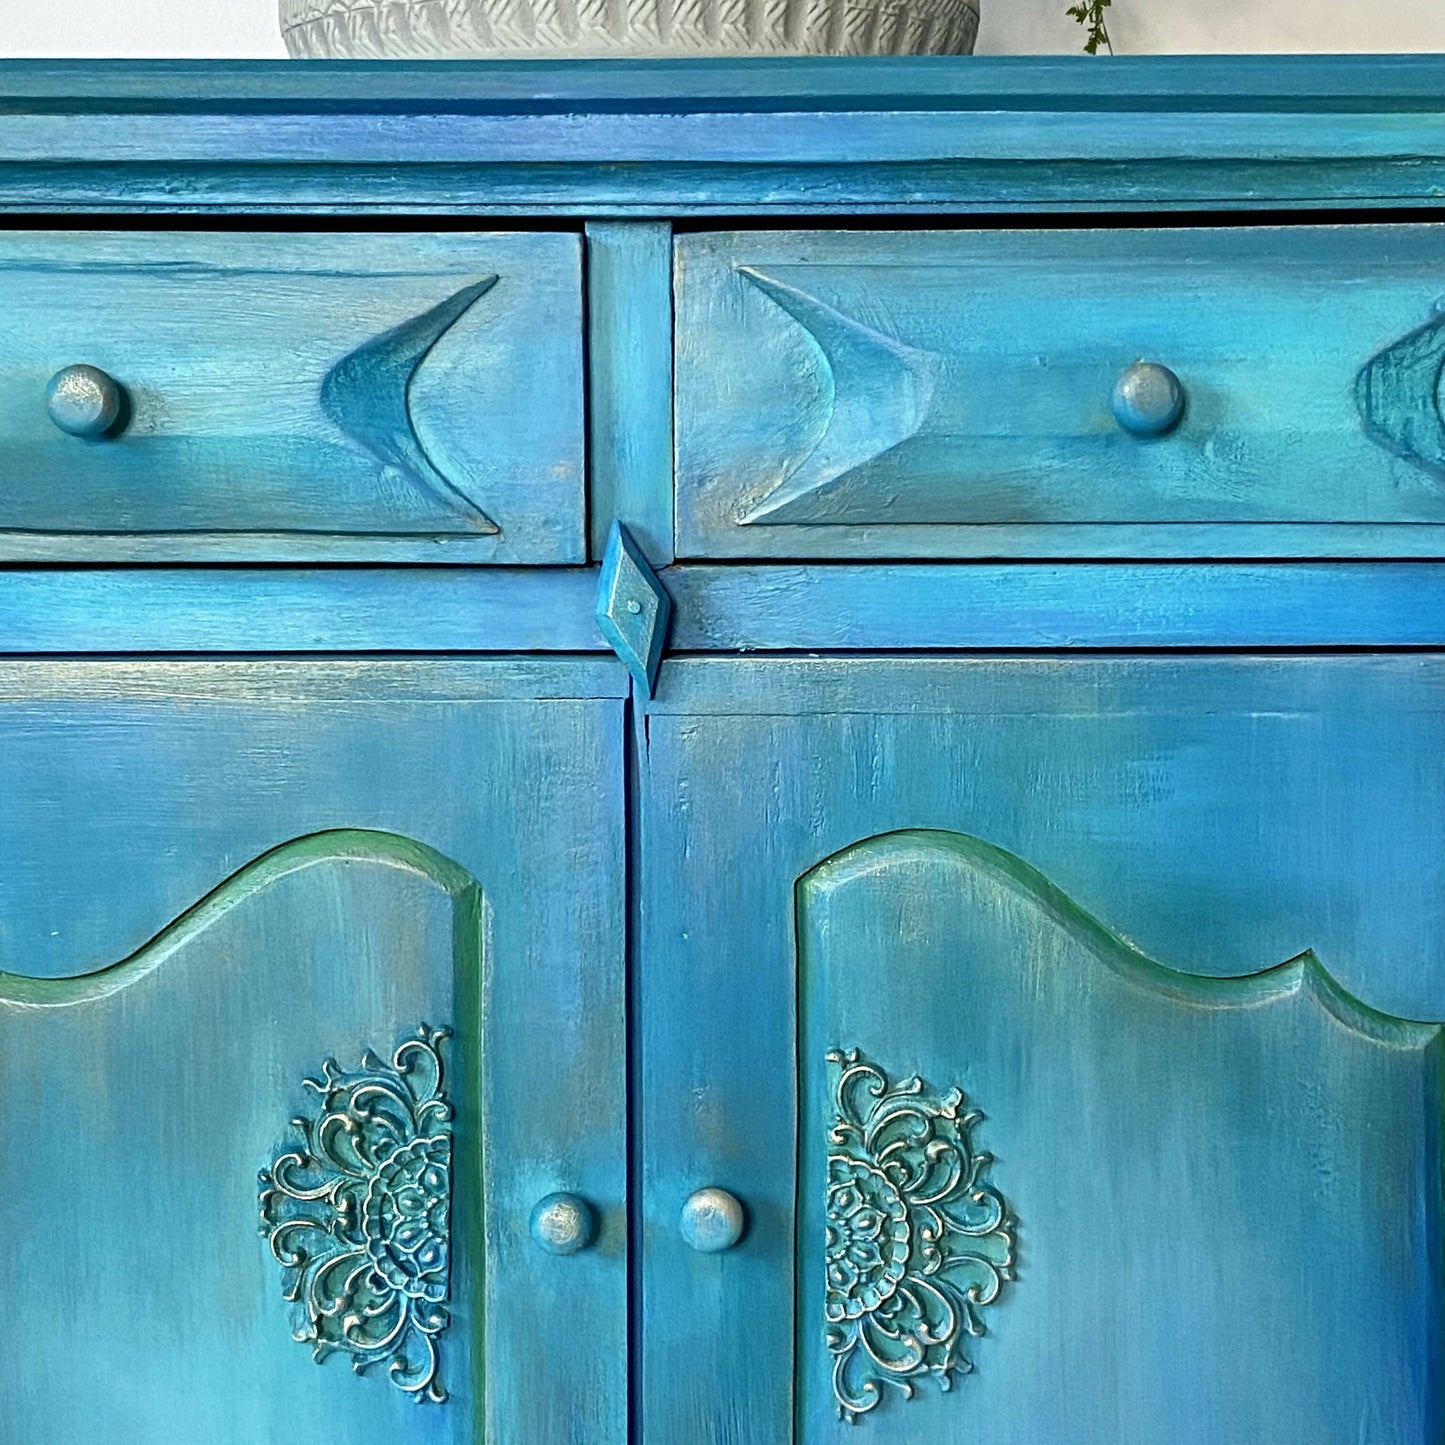 Boho style painted cupboard, turquoise blends